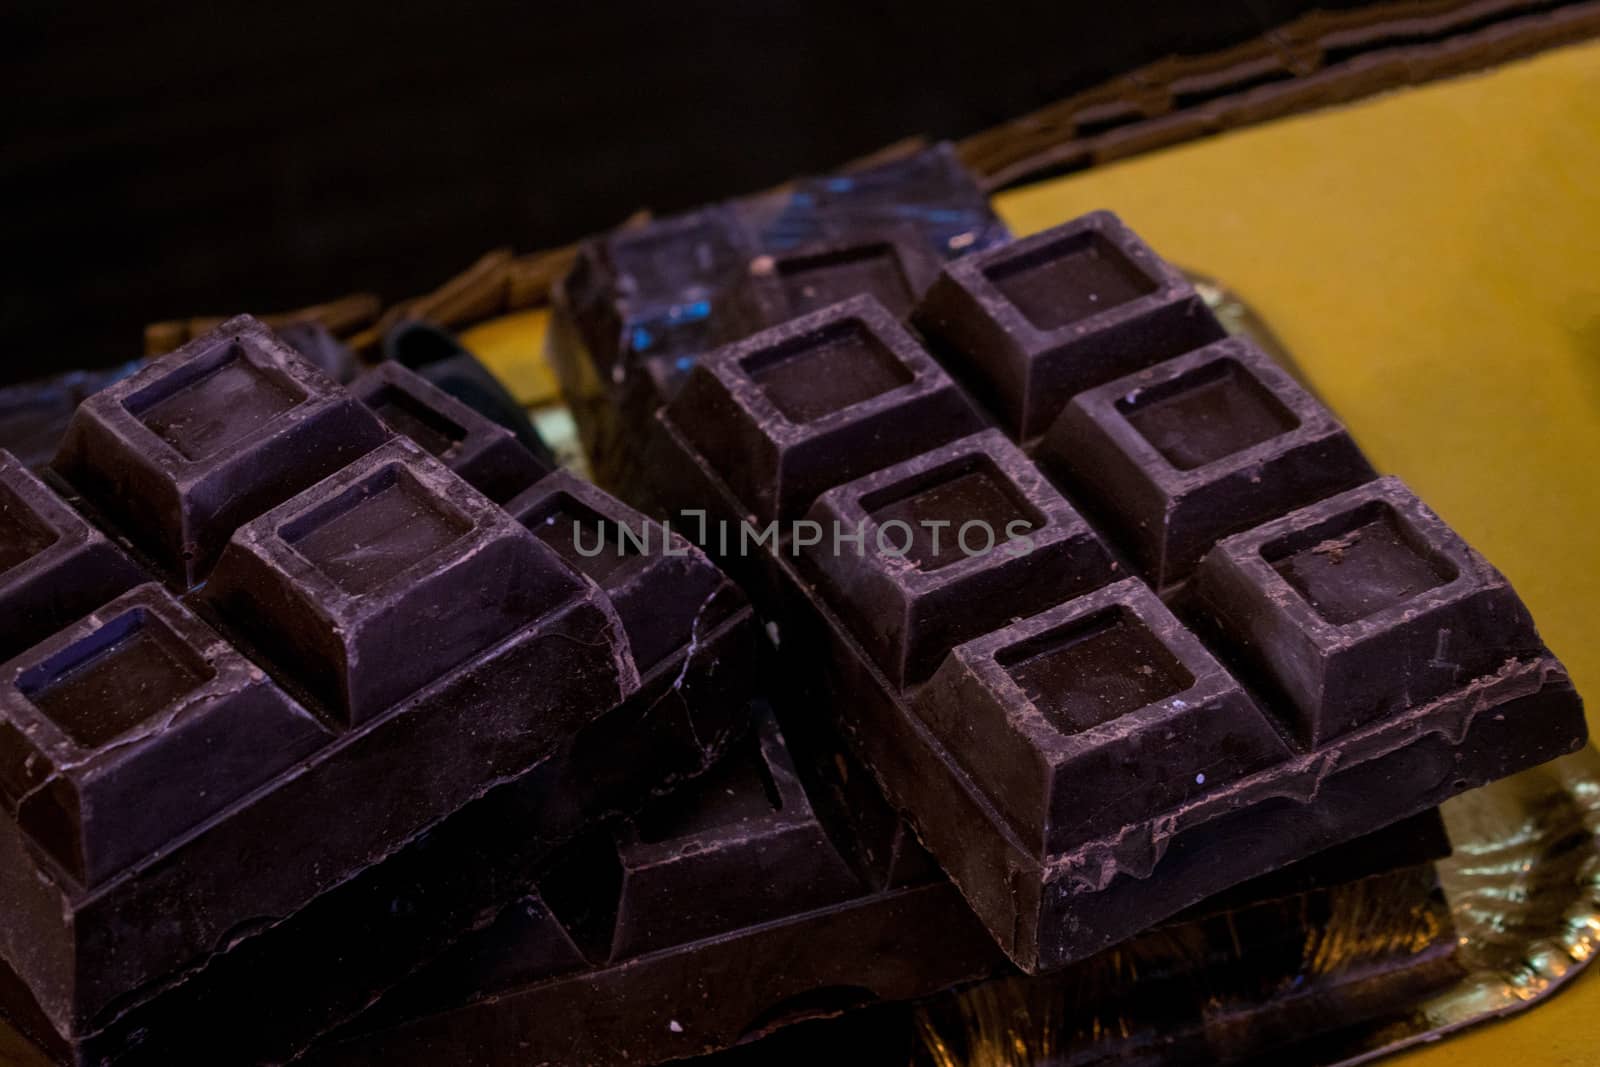 Some bars of dark chocolate with squares